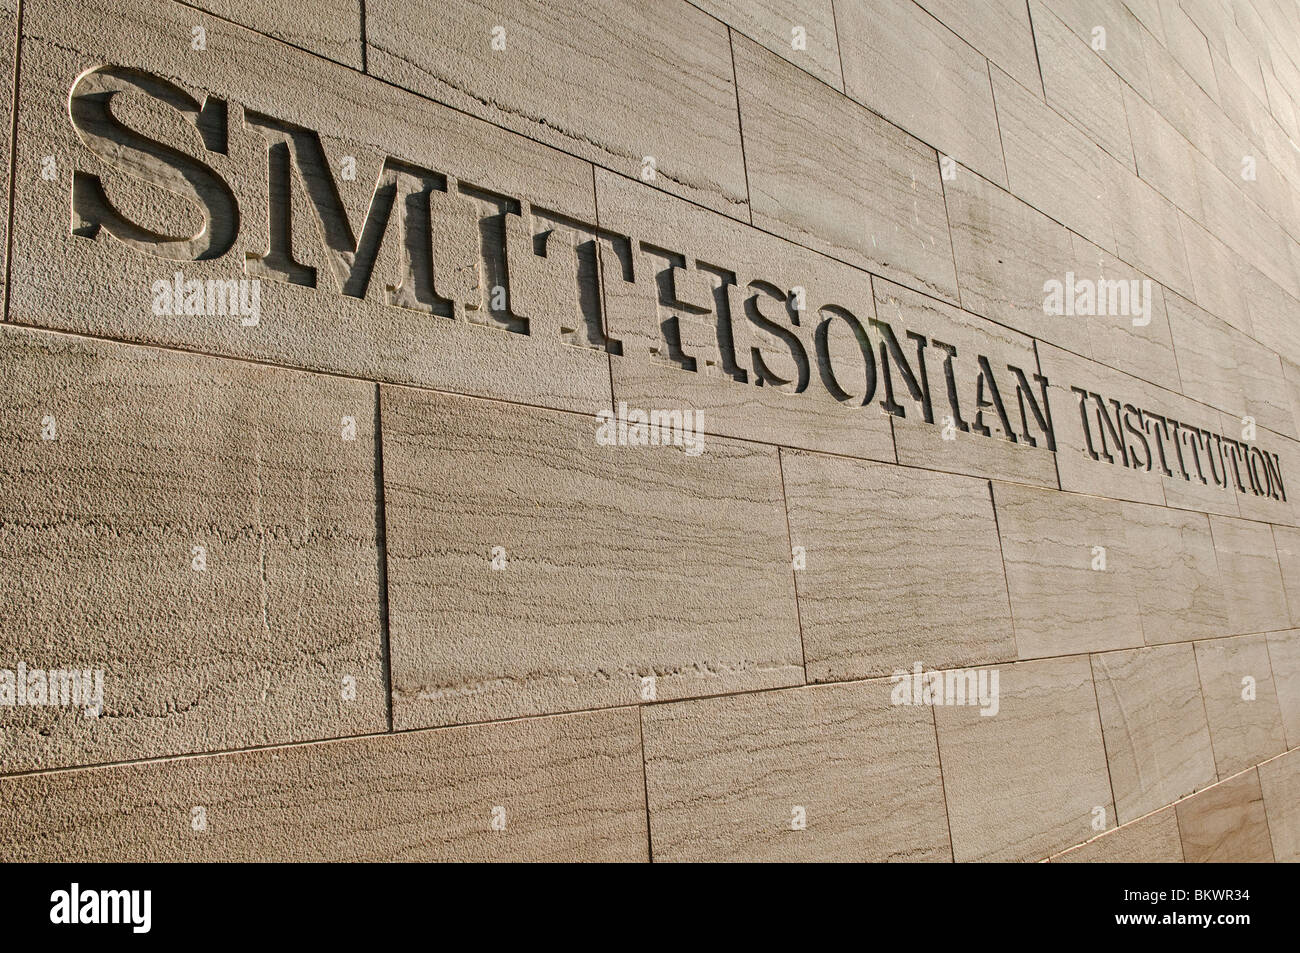 WASHINGTON DC, USA - Smithsonian Institution sign etched into the stone exterior fo the National Air and Space Museum Stock Photo